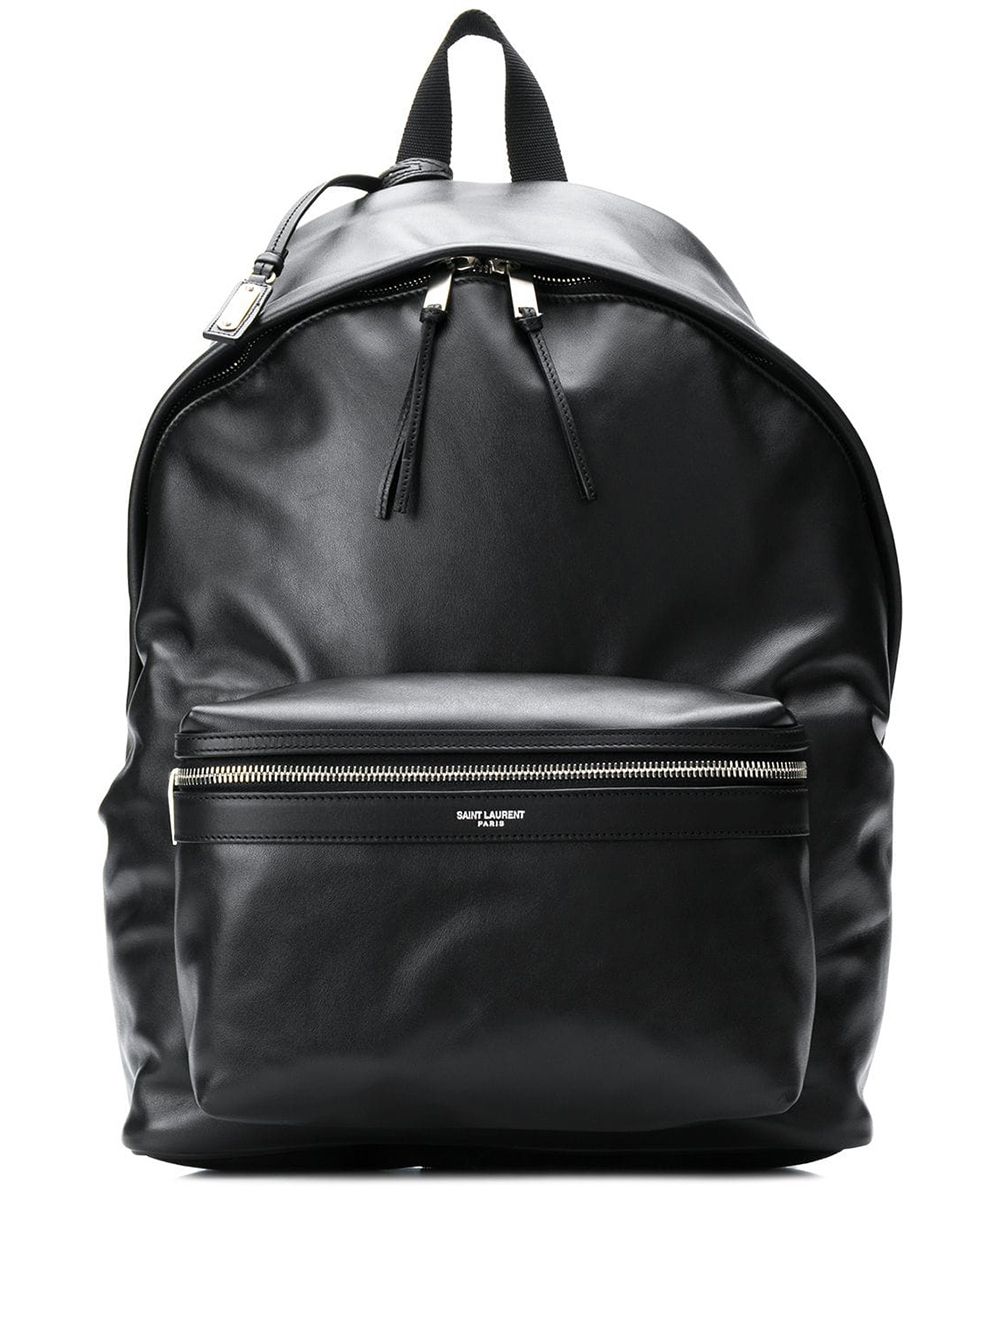 City leather backpack